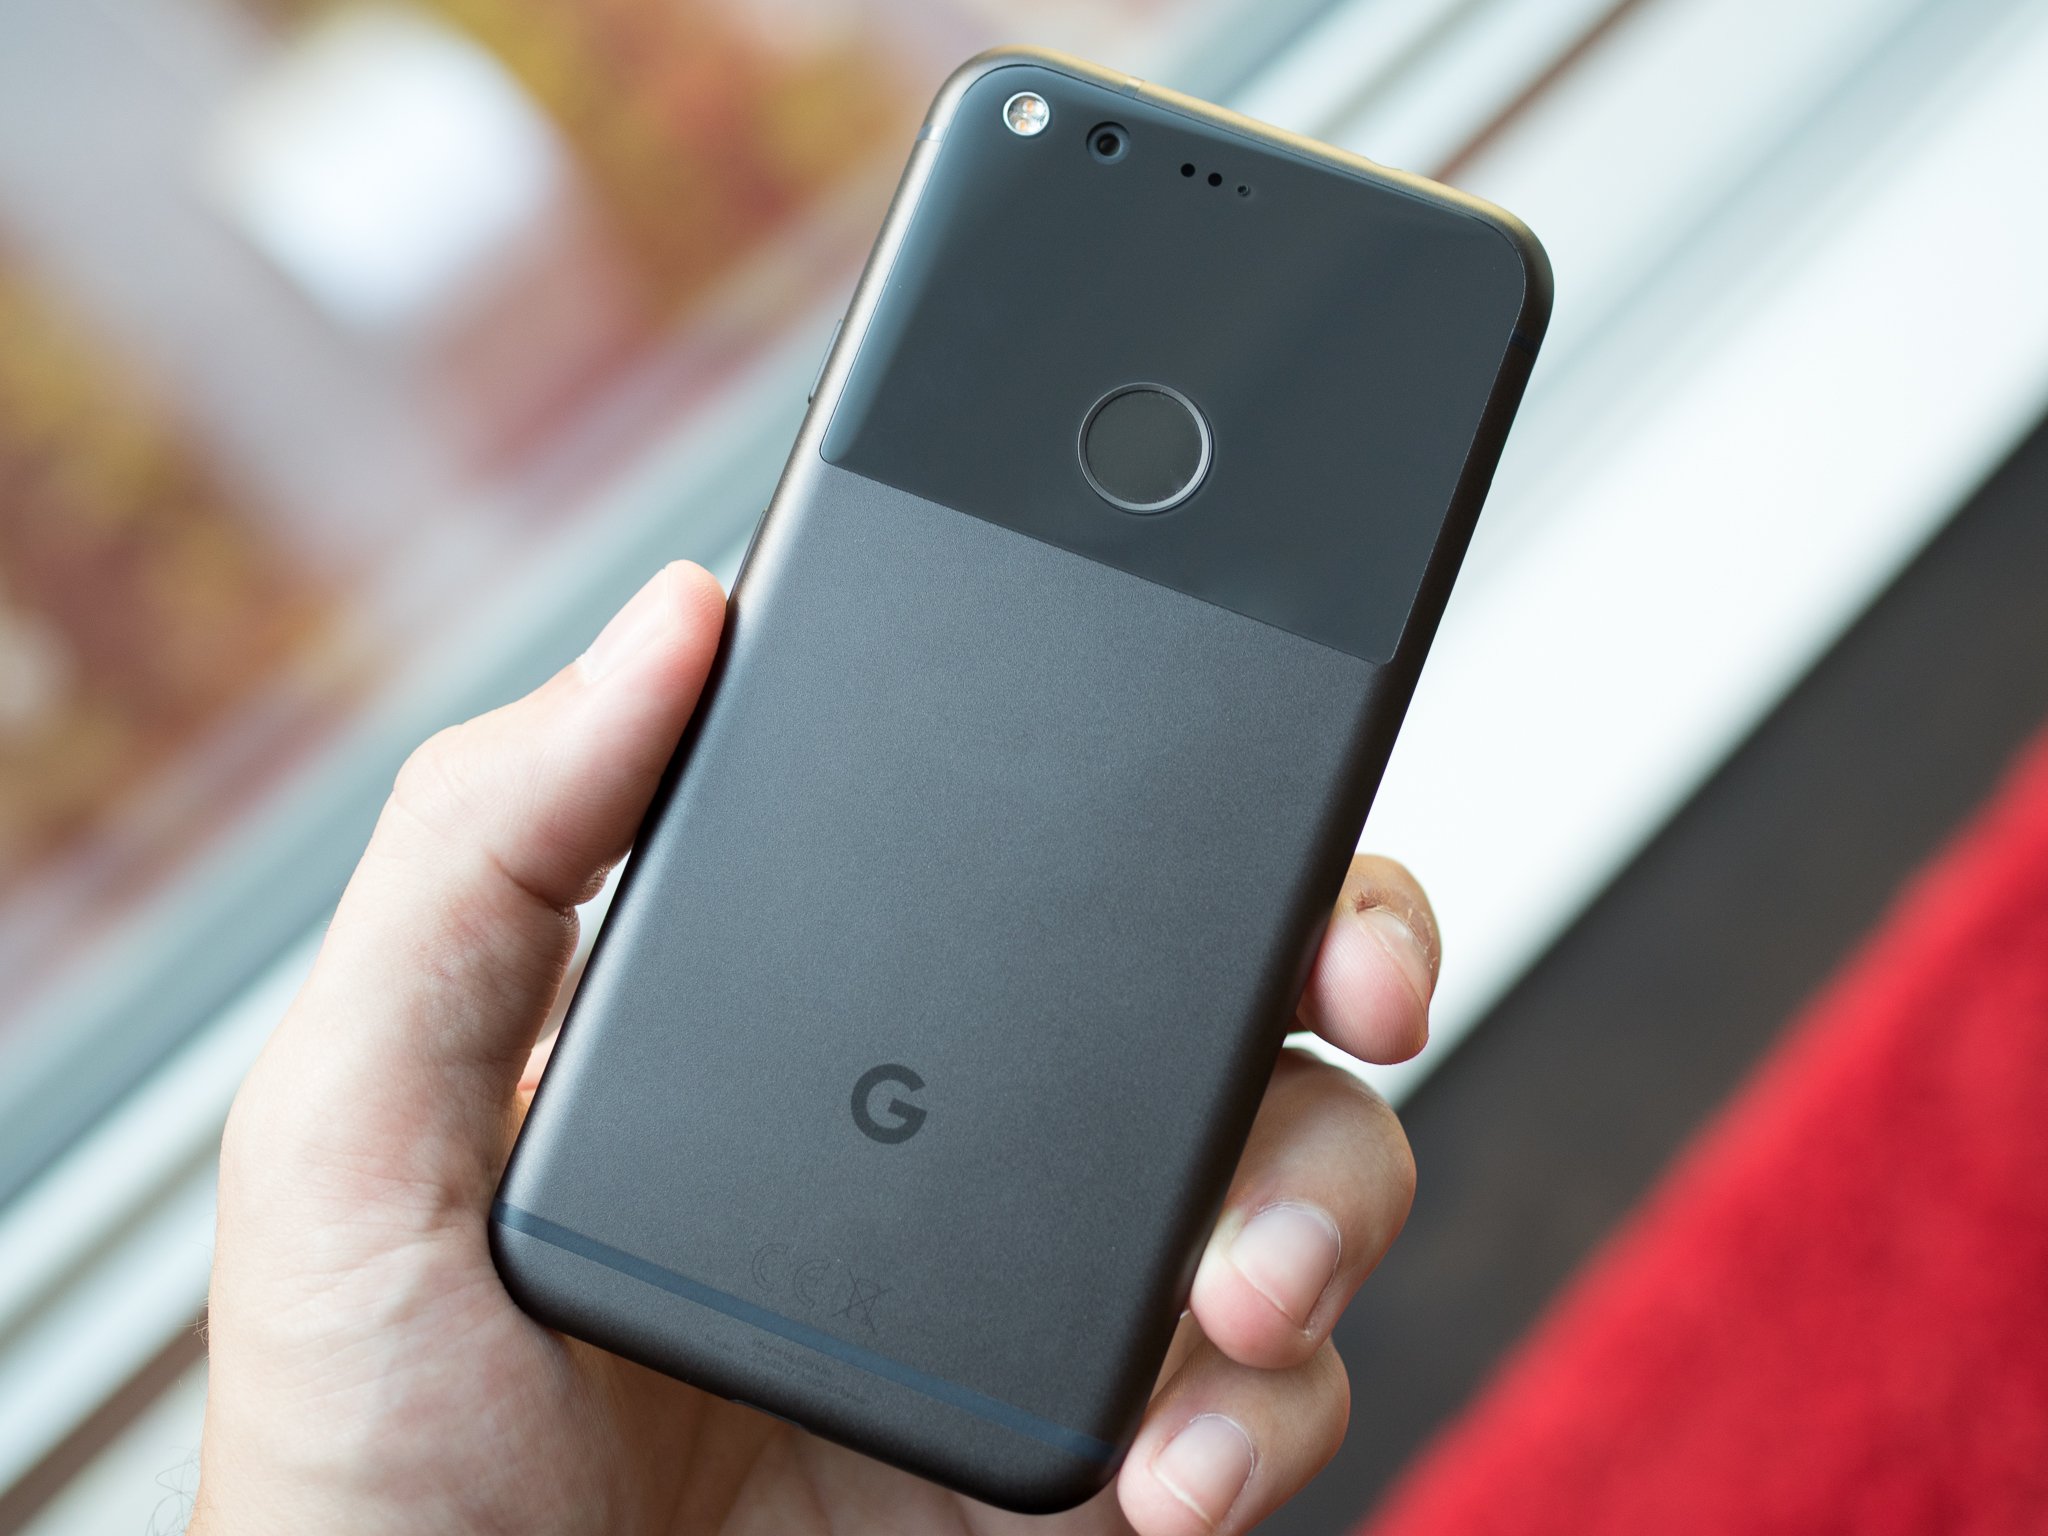 Google Pixel 2 and Pixel 2 XL: Release Date, Specs, Price and Rumors - Will The Pixel 2xl Have A Black Friday Deal Reddit